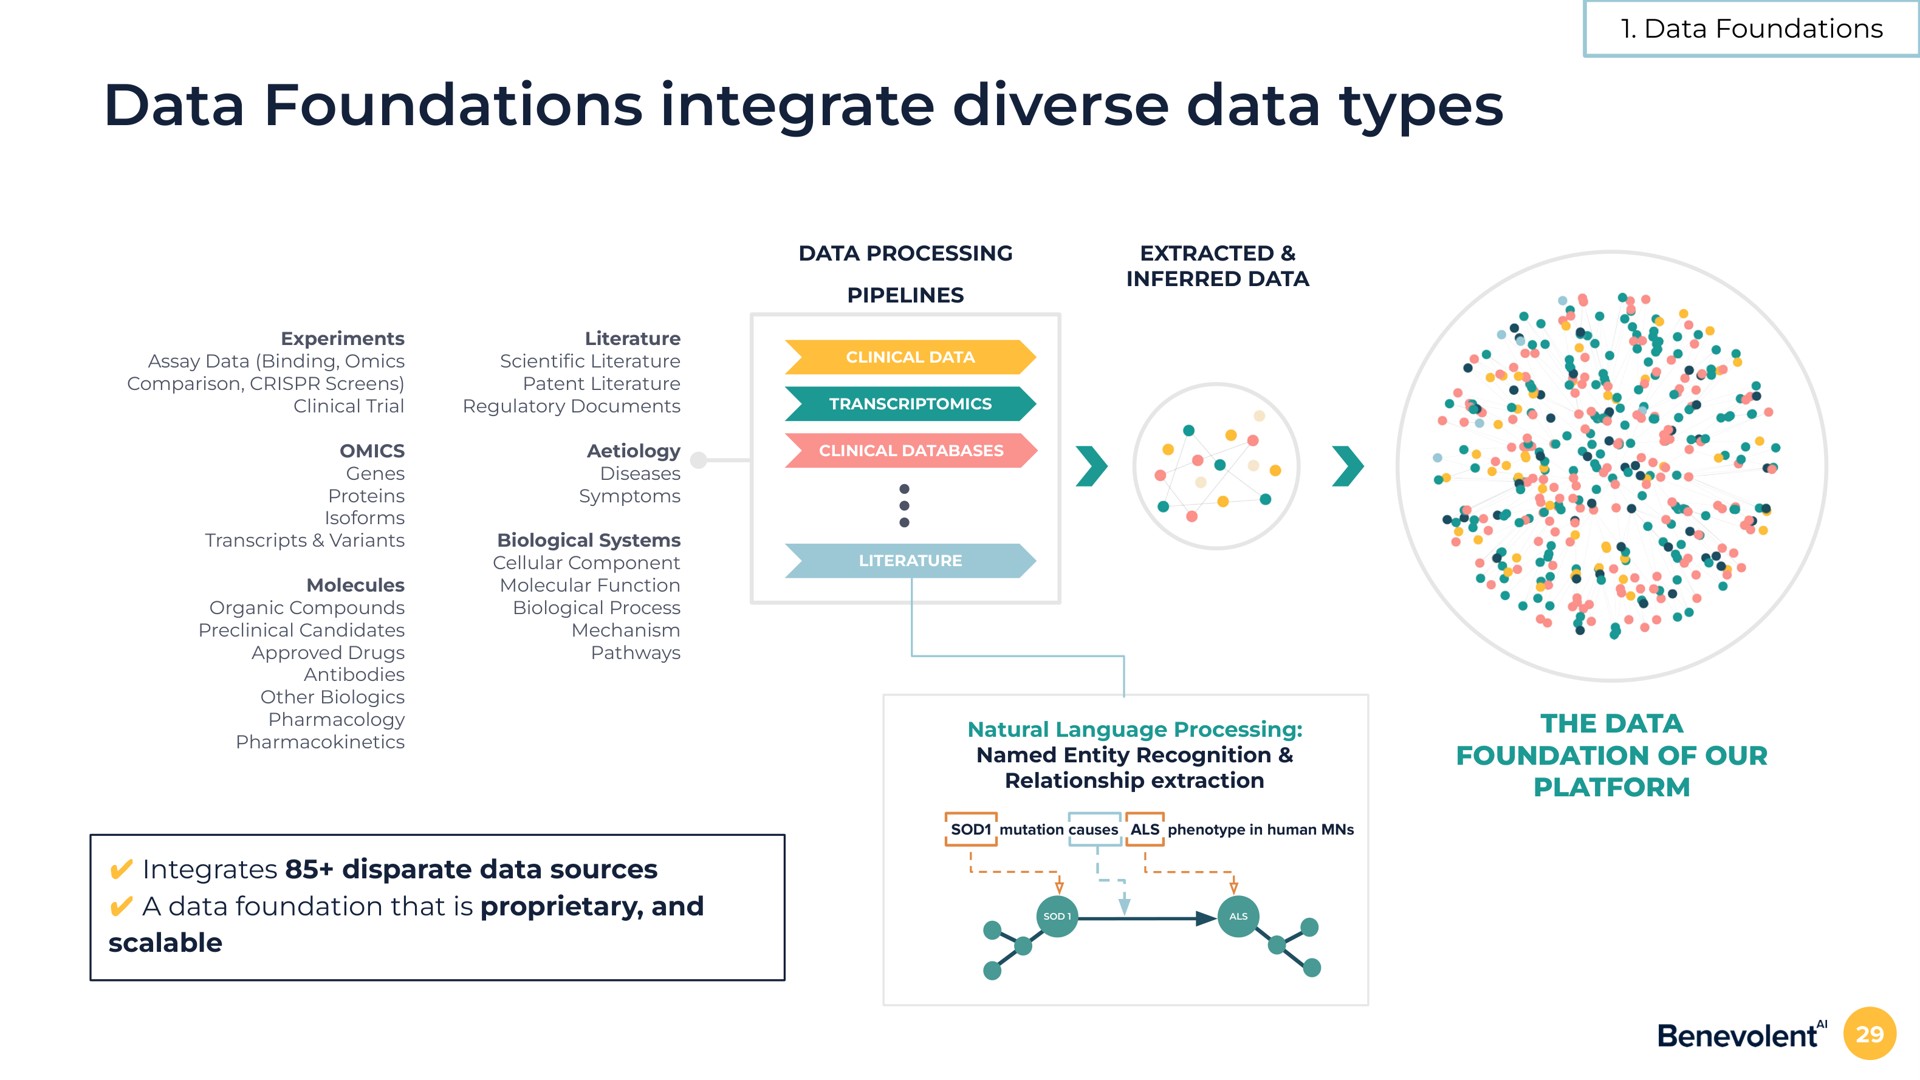 data foundations integrate diverse data types data foundations the data foundation of our platform integrates disparate data sources a data foundation that is proprietary and scalable | BenevolentAI